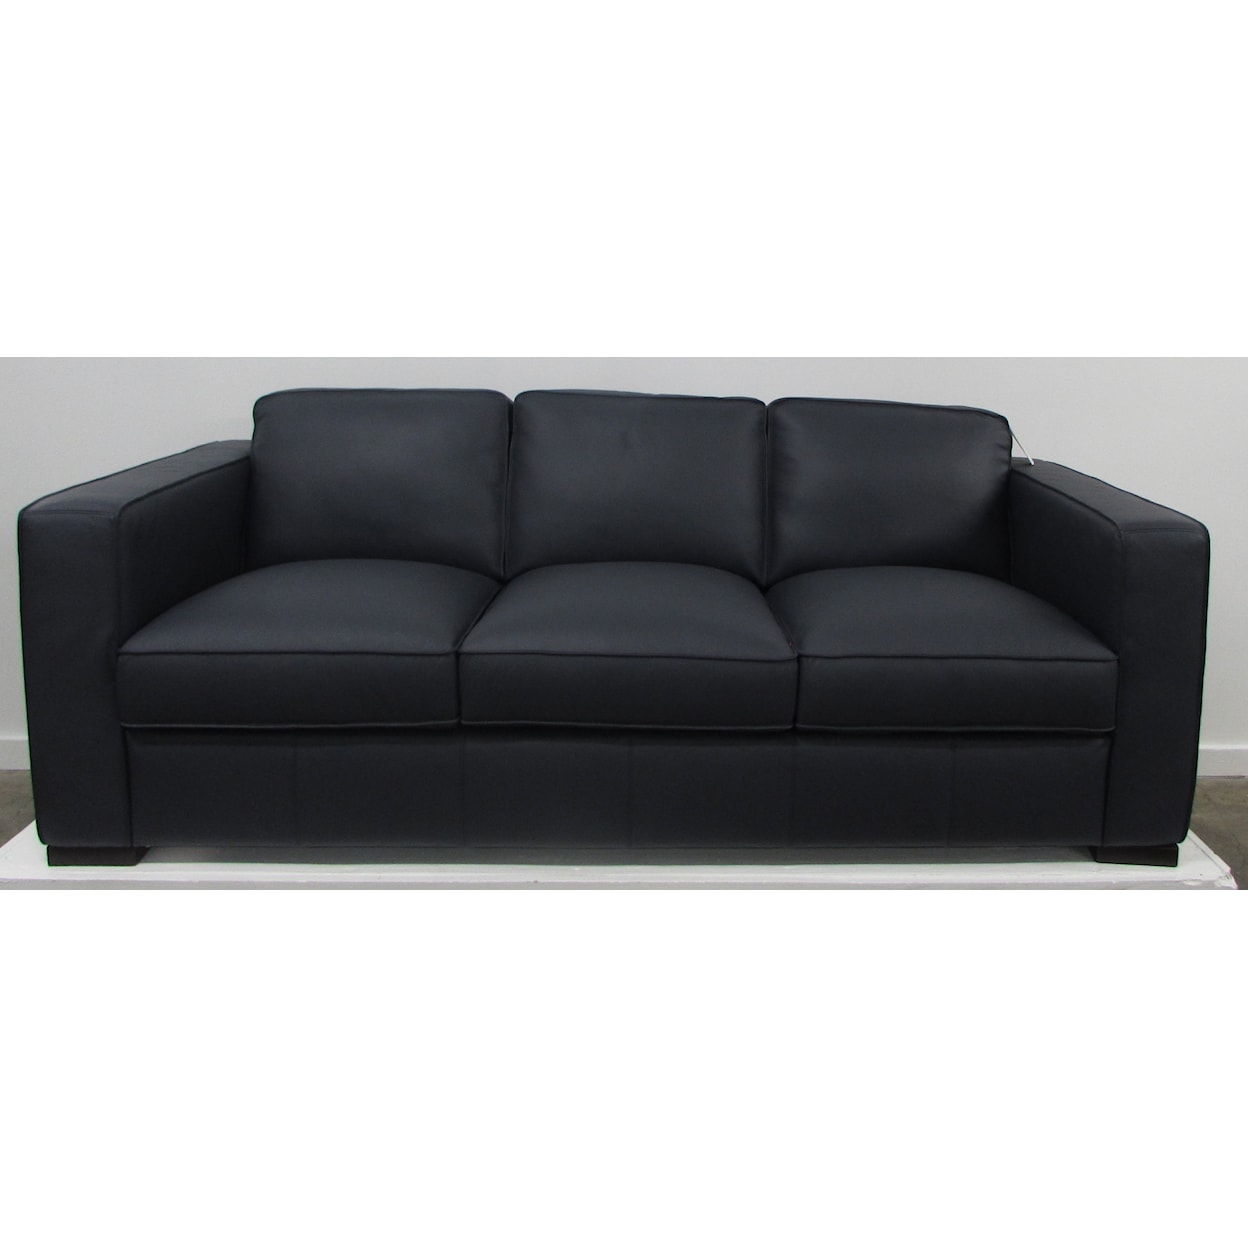 Natuzzi Editions C274 Leather Collection C274 Navy Leather sofa